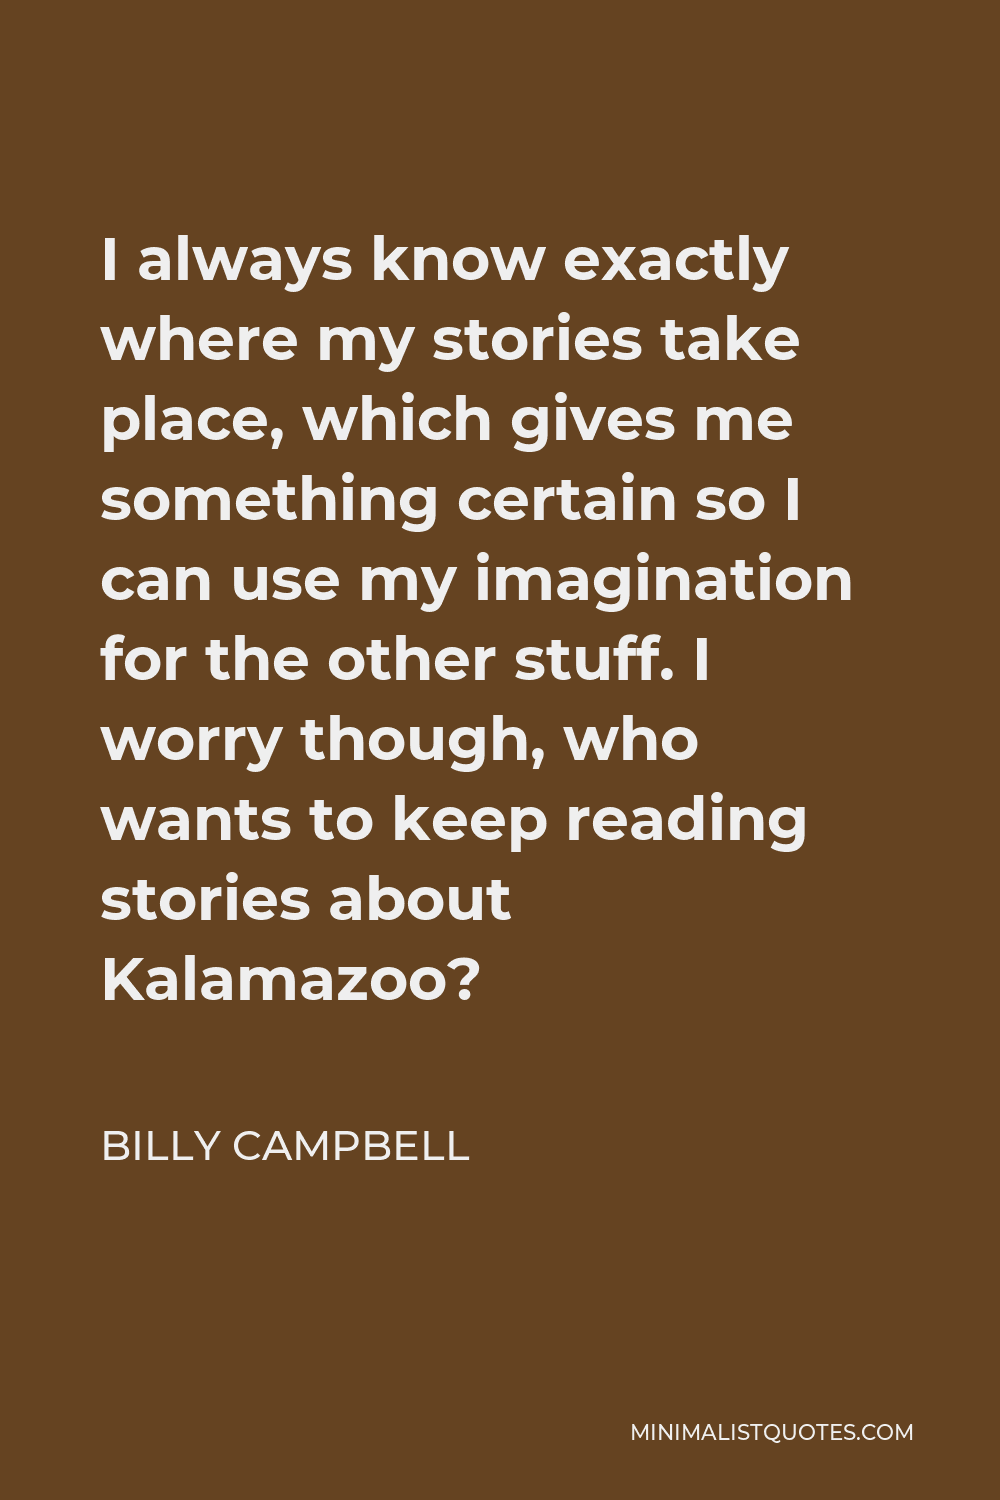 Billy Campbell Quote - I always know exactly where my stories take place, which gives me something certain so I can use my imagination for the other stuff. I worry though, who wants to keep reading stories about Kalamazoo?